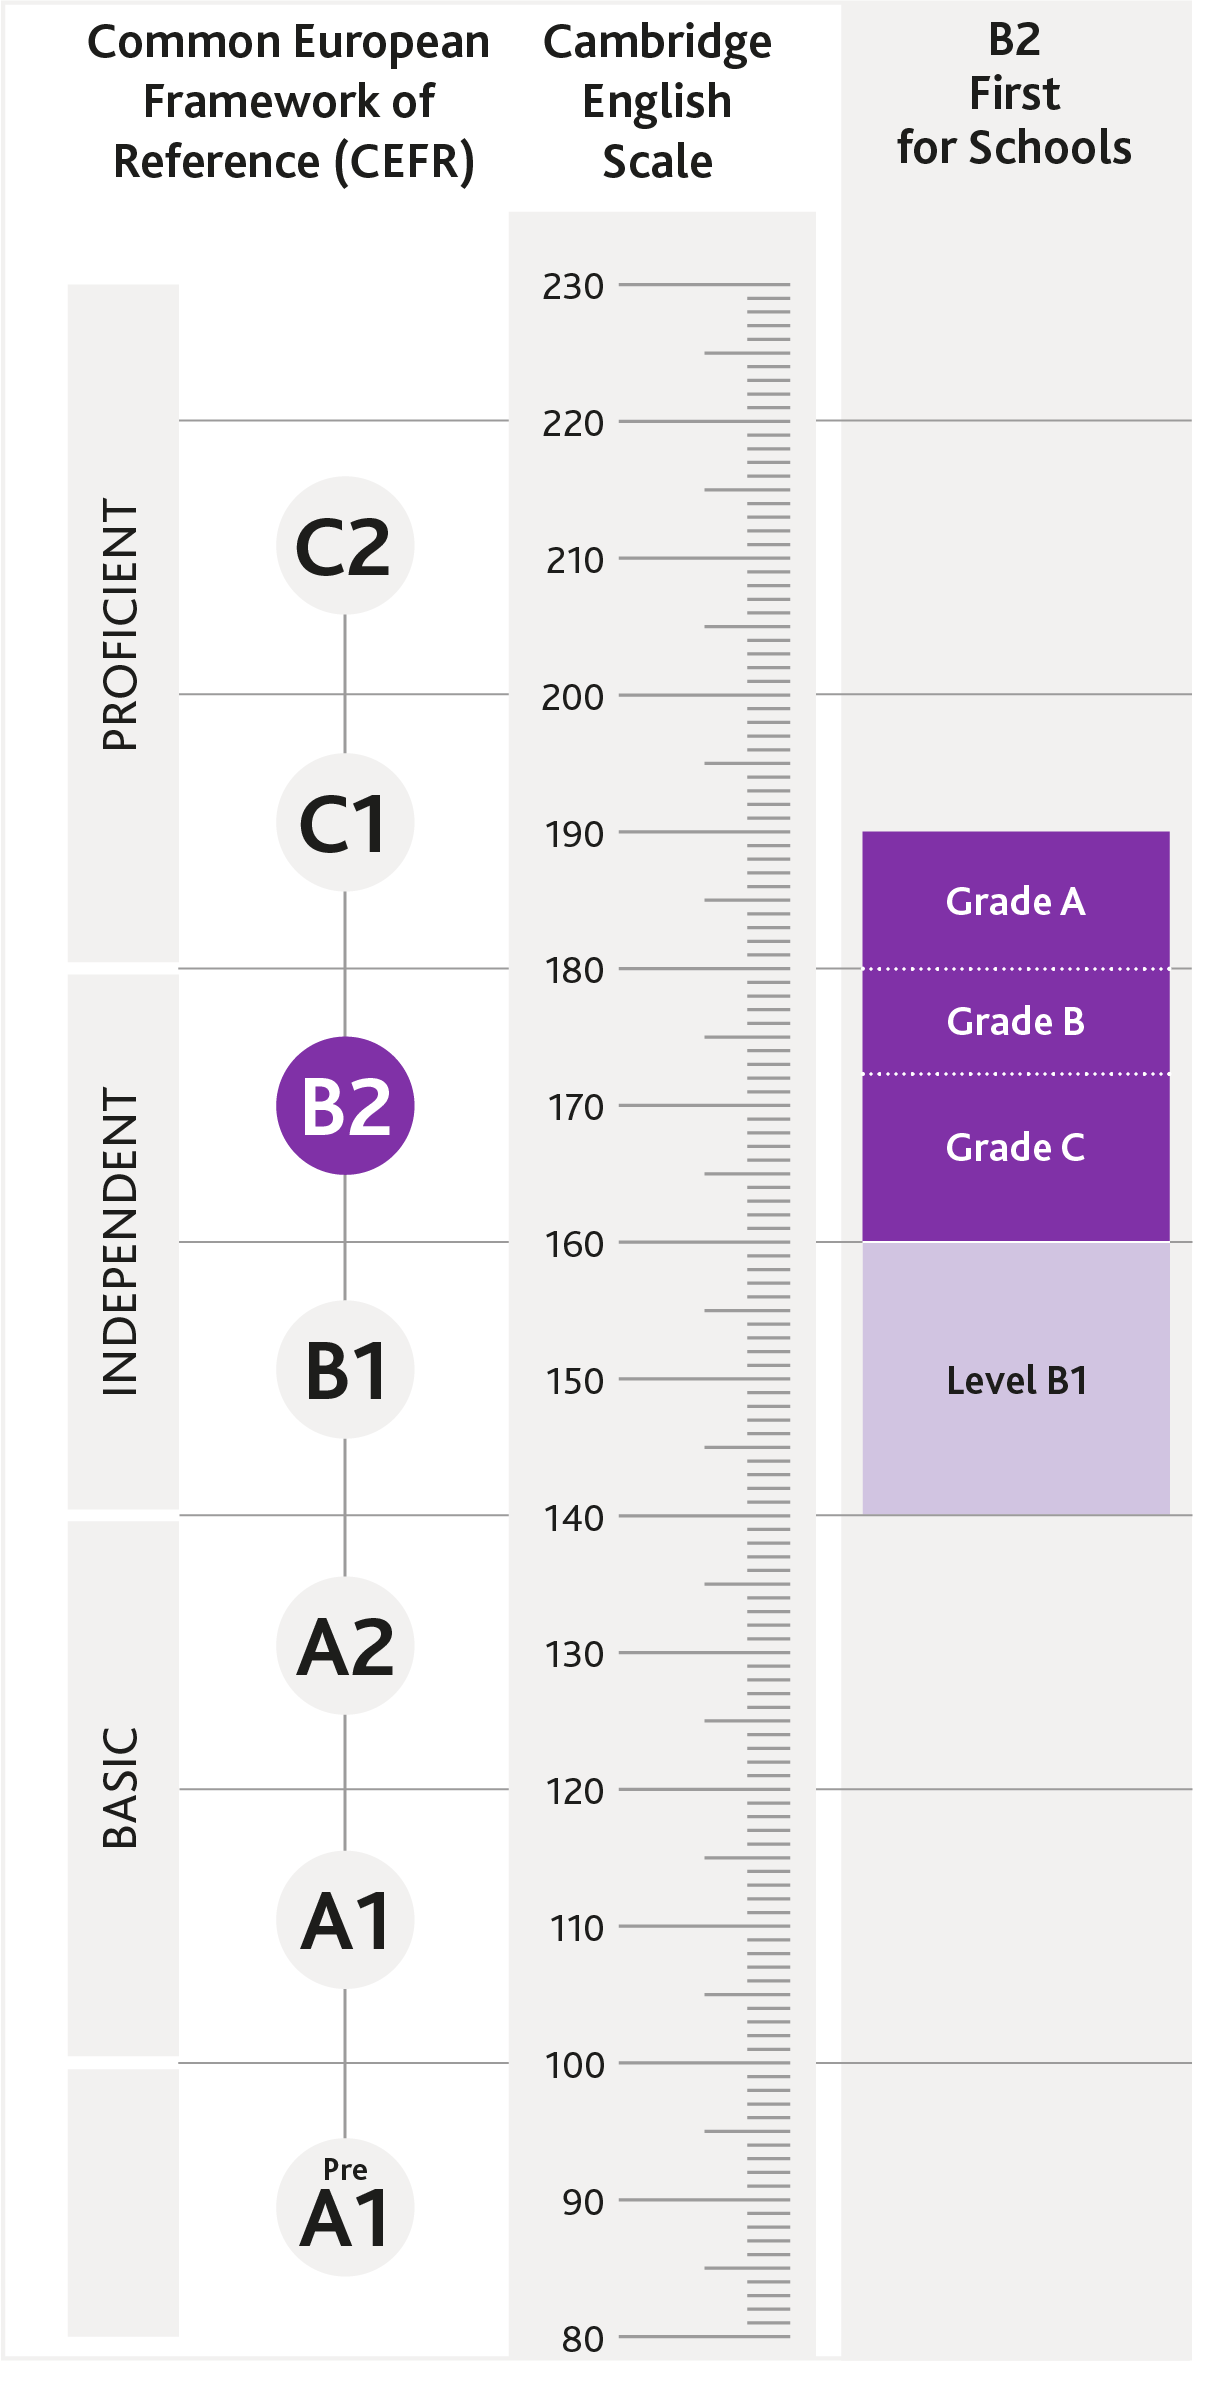 Diagram of where Cambridge English: First for Schools is aligned on the CEFR and Cambridge English Scale